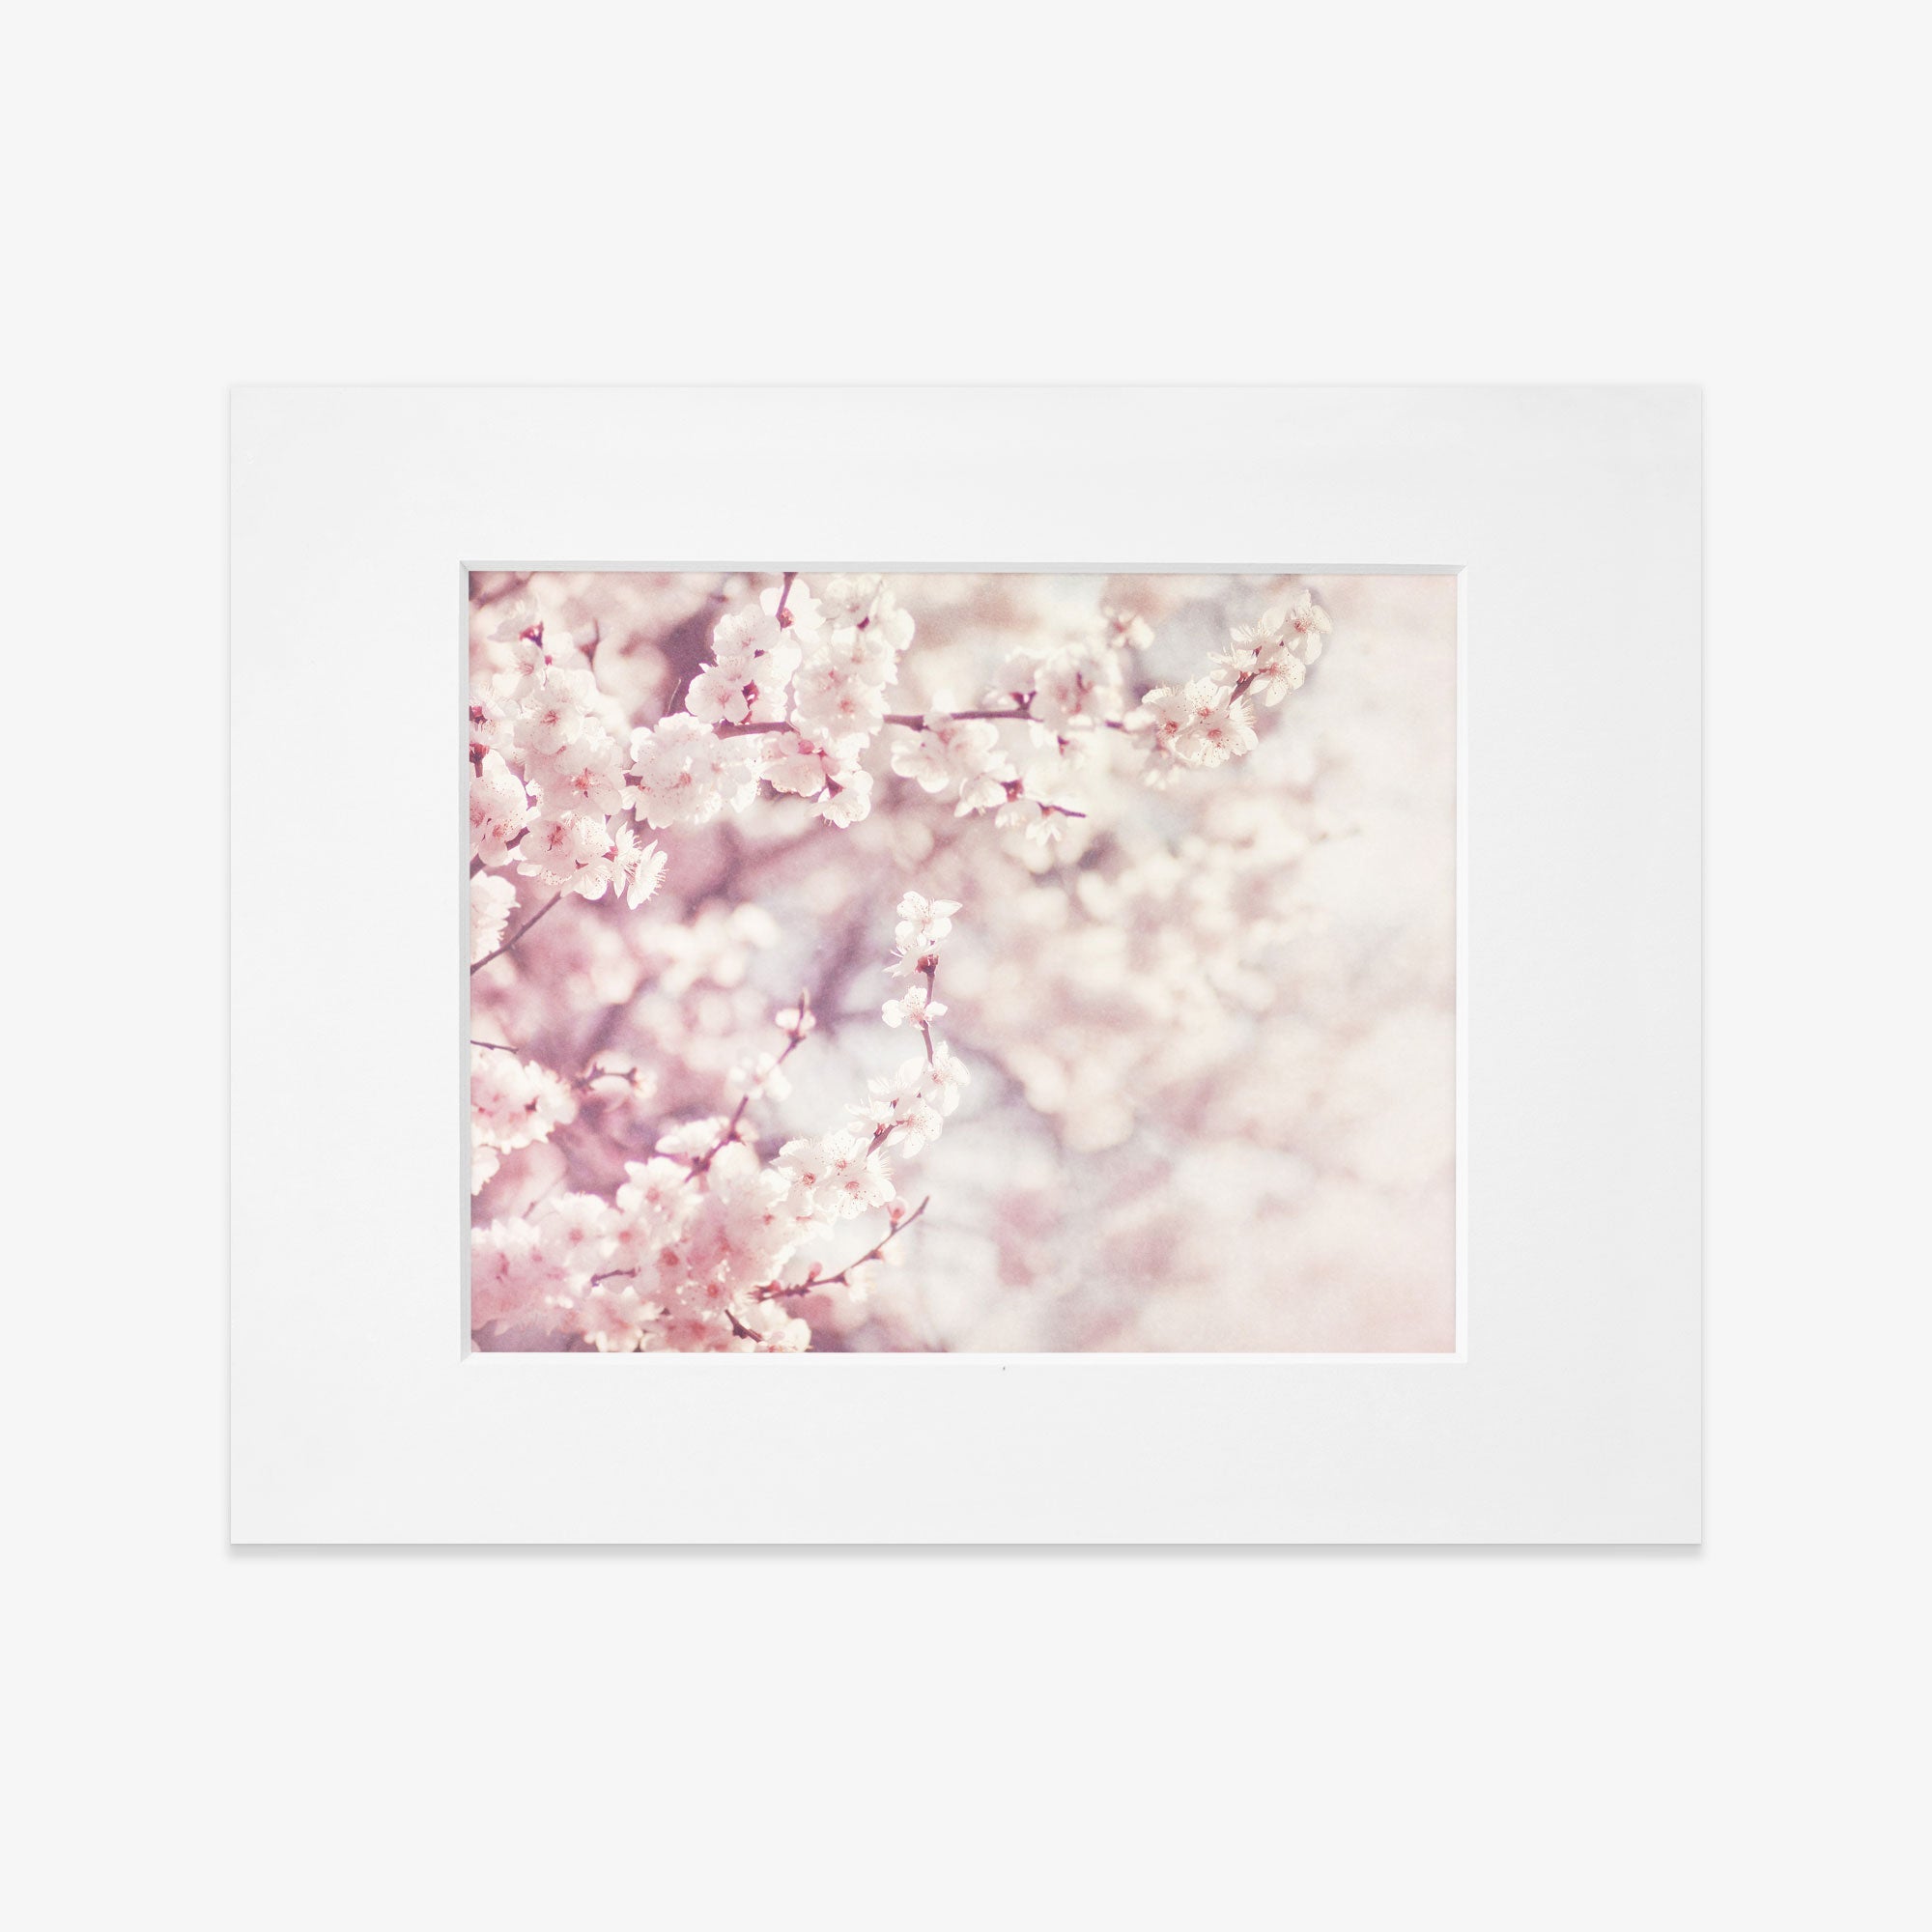 Framed Pink Floral Print of delicate cherry blossoms in full bloom on archival photographic paper, with a soft focus on shabby pink and white flowers, presenting a dreamy, springtime aesthetic by Offley Green.